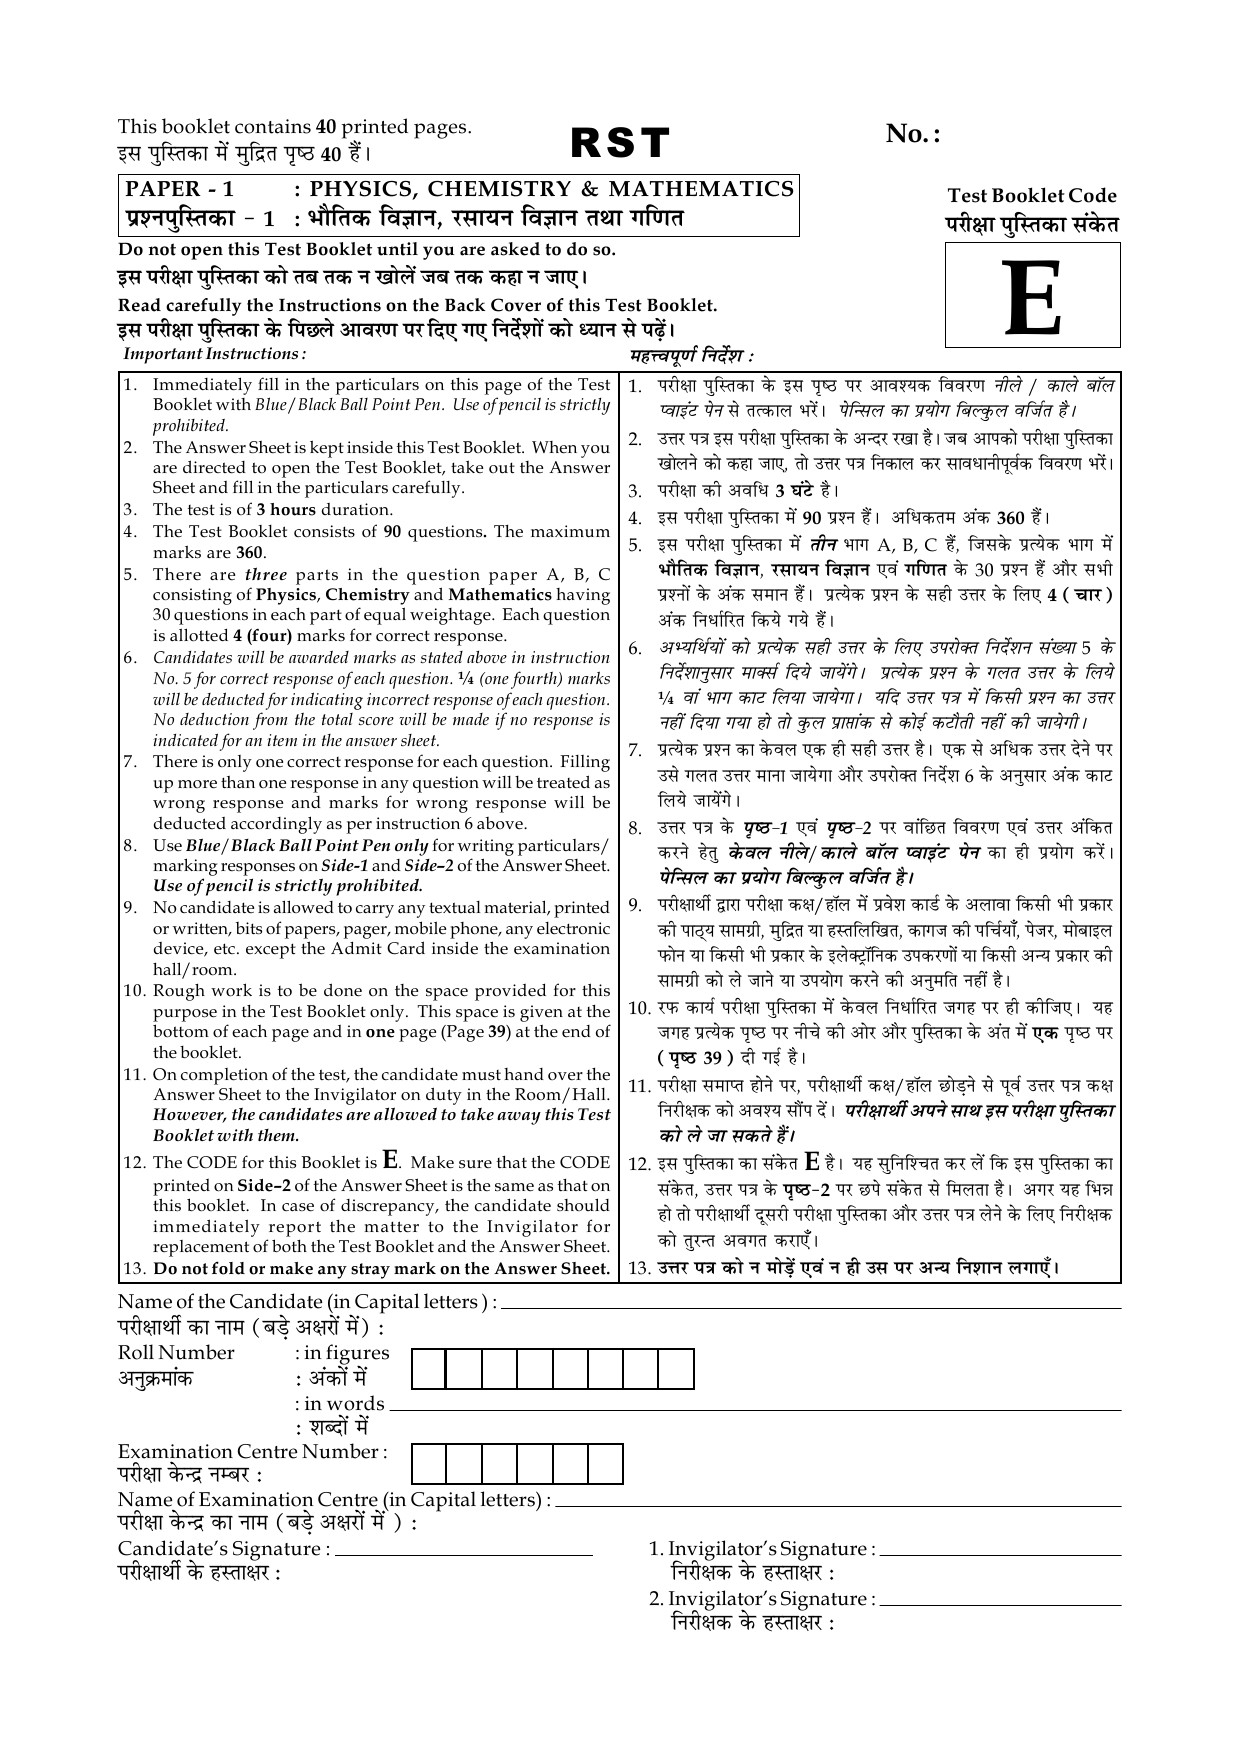 JEE Main Exam Question Paper 2014 Booklet E 1